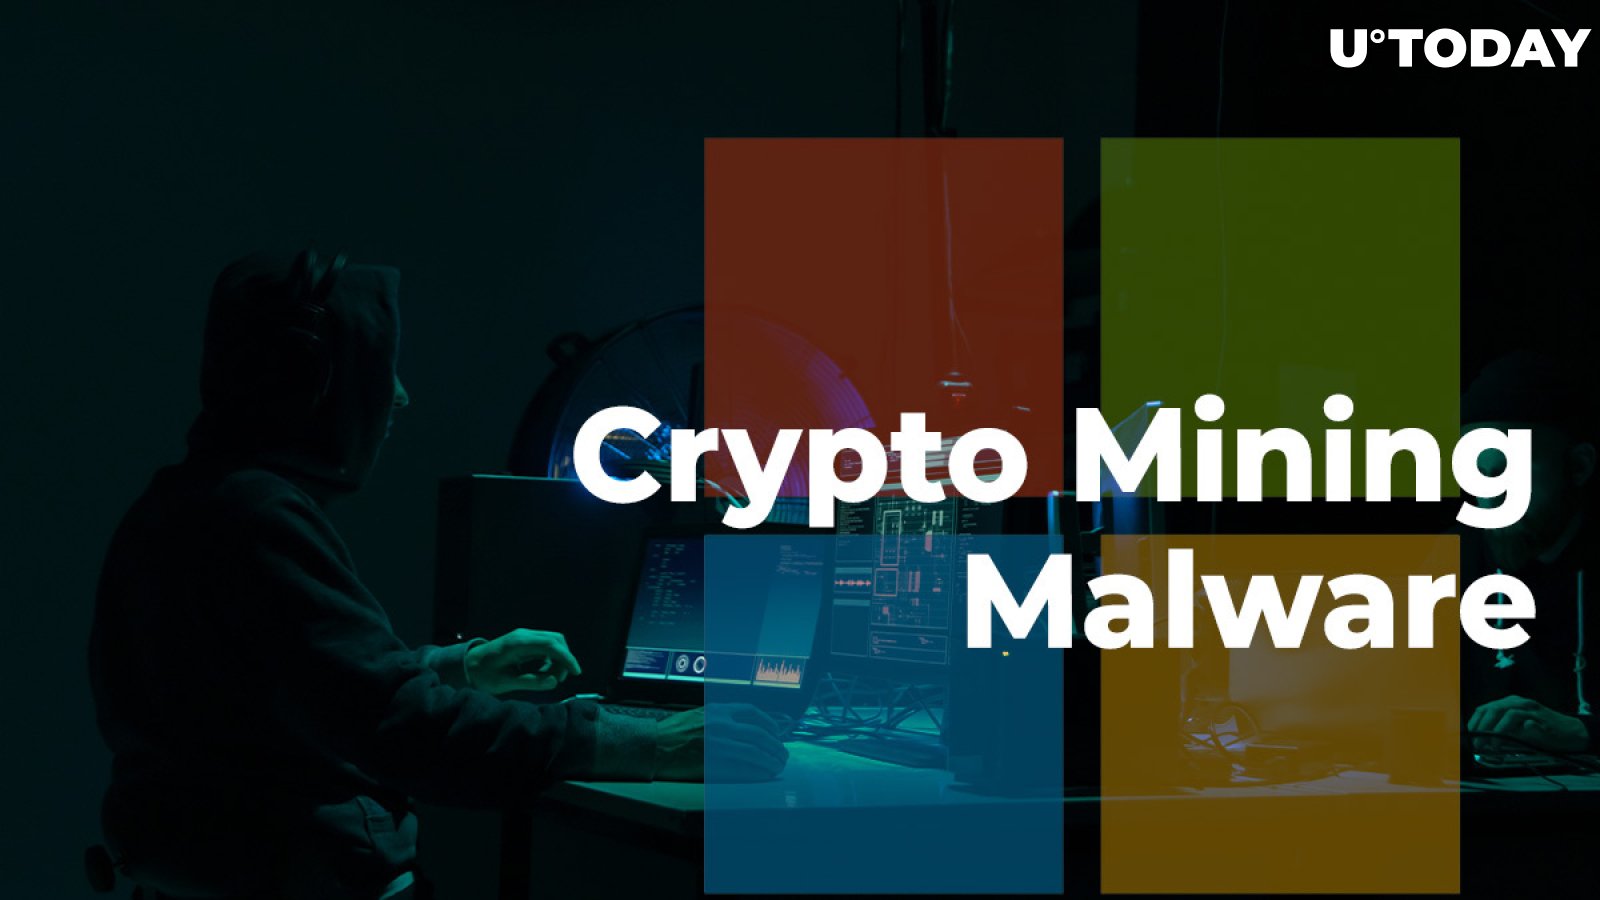 Hackers Infect Microsoft Servers with Crypto Mining Malware. Here's How They Did It